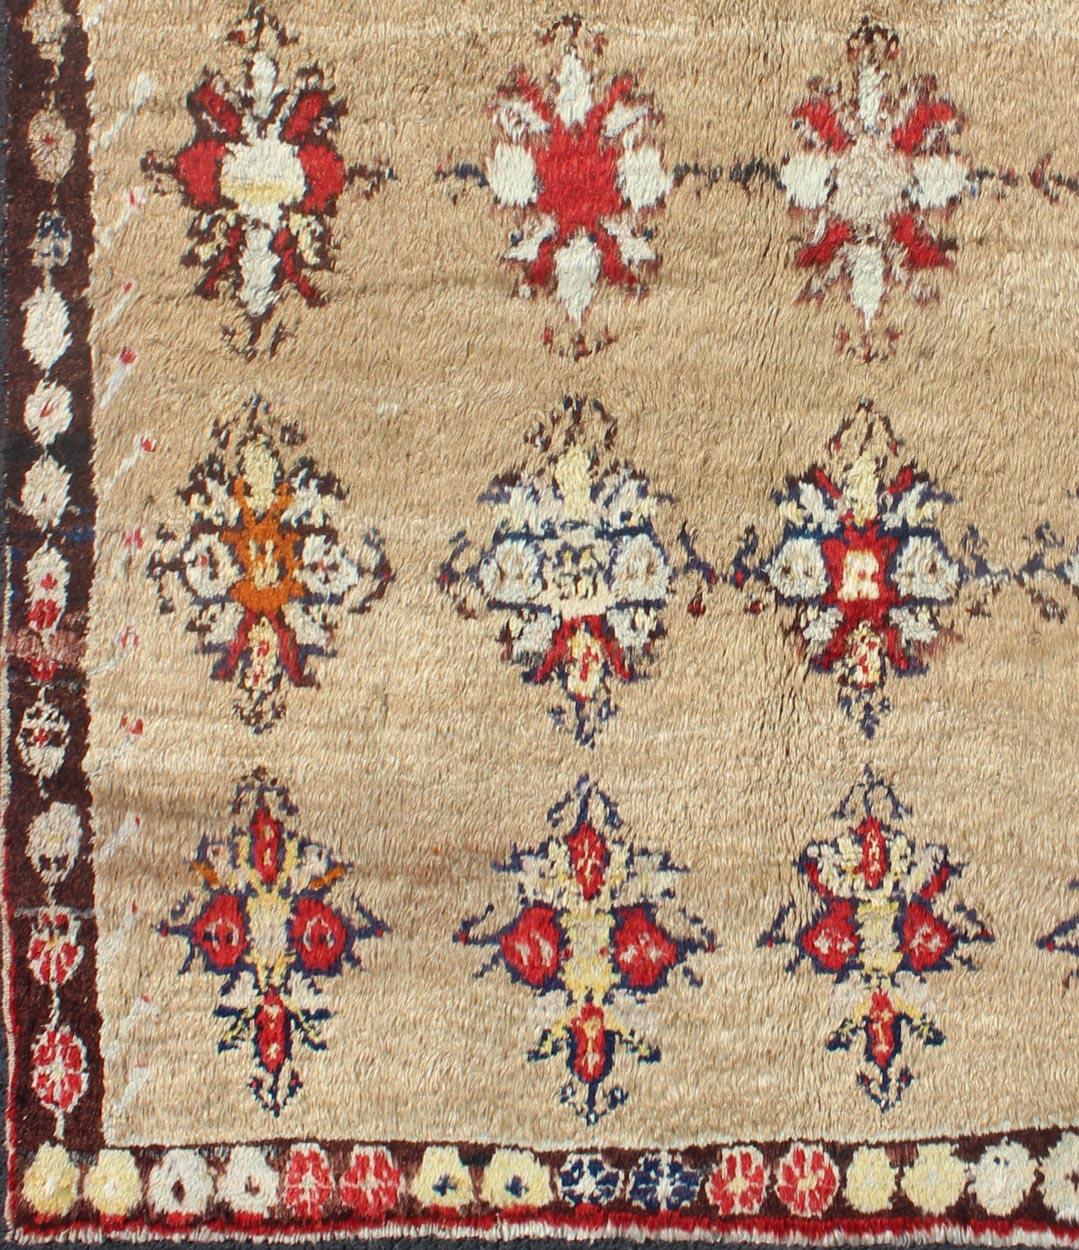 This Tulu carpet features several multicolored floral motifs laid across a sand-colored field and enclosed within a chocolate brown border of alternating botanical motifs. Accent colors include light green, orange, ivory, red and charcoal. Tulu